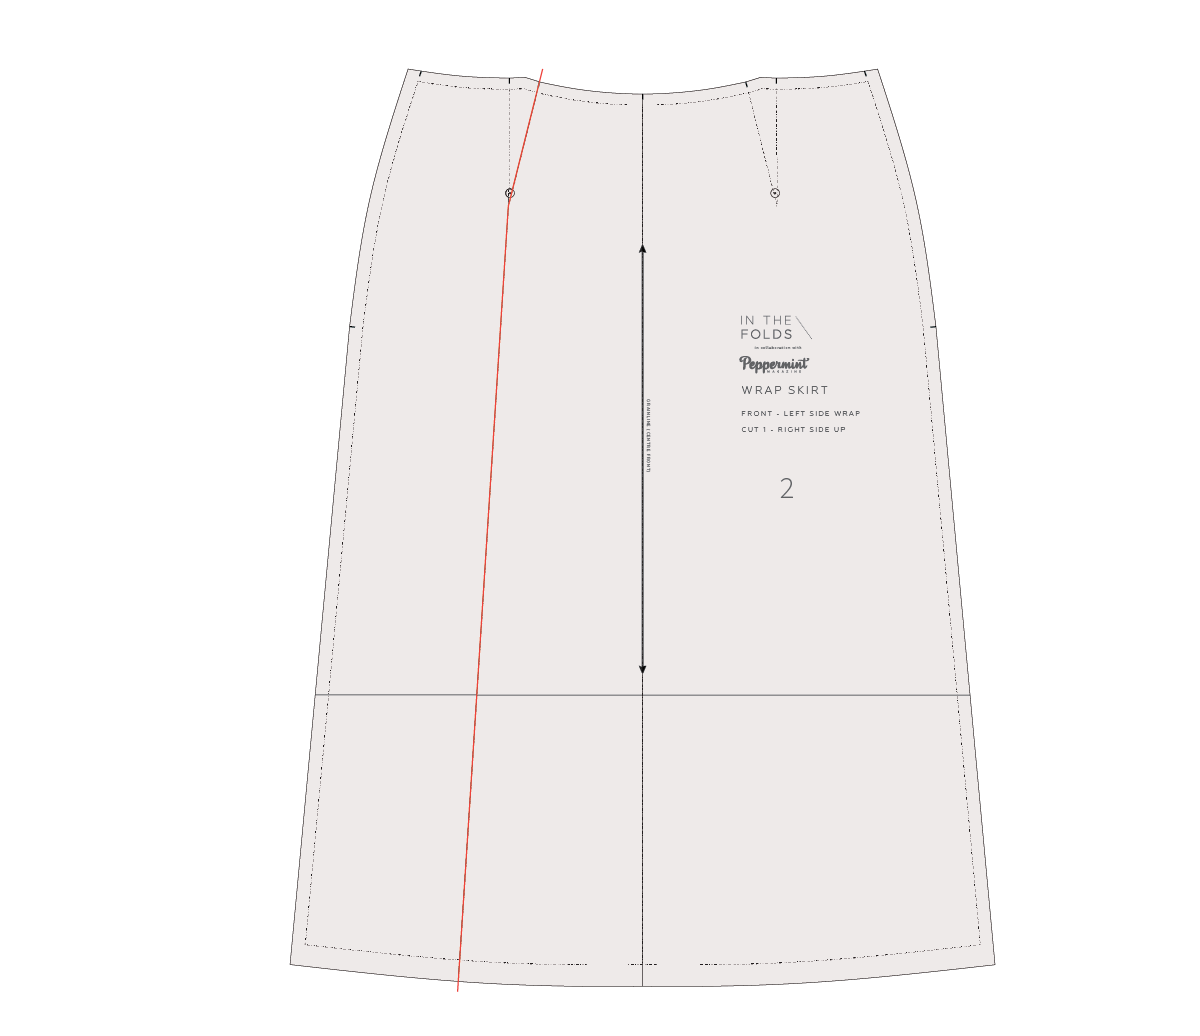 How to make a wrap skirt with more coverage — In the Folds